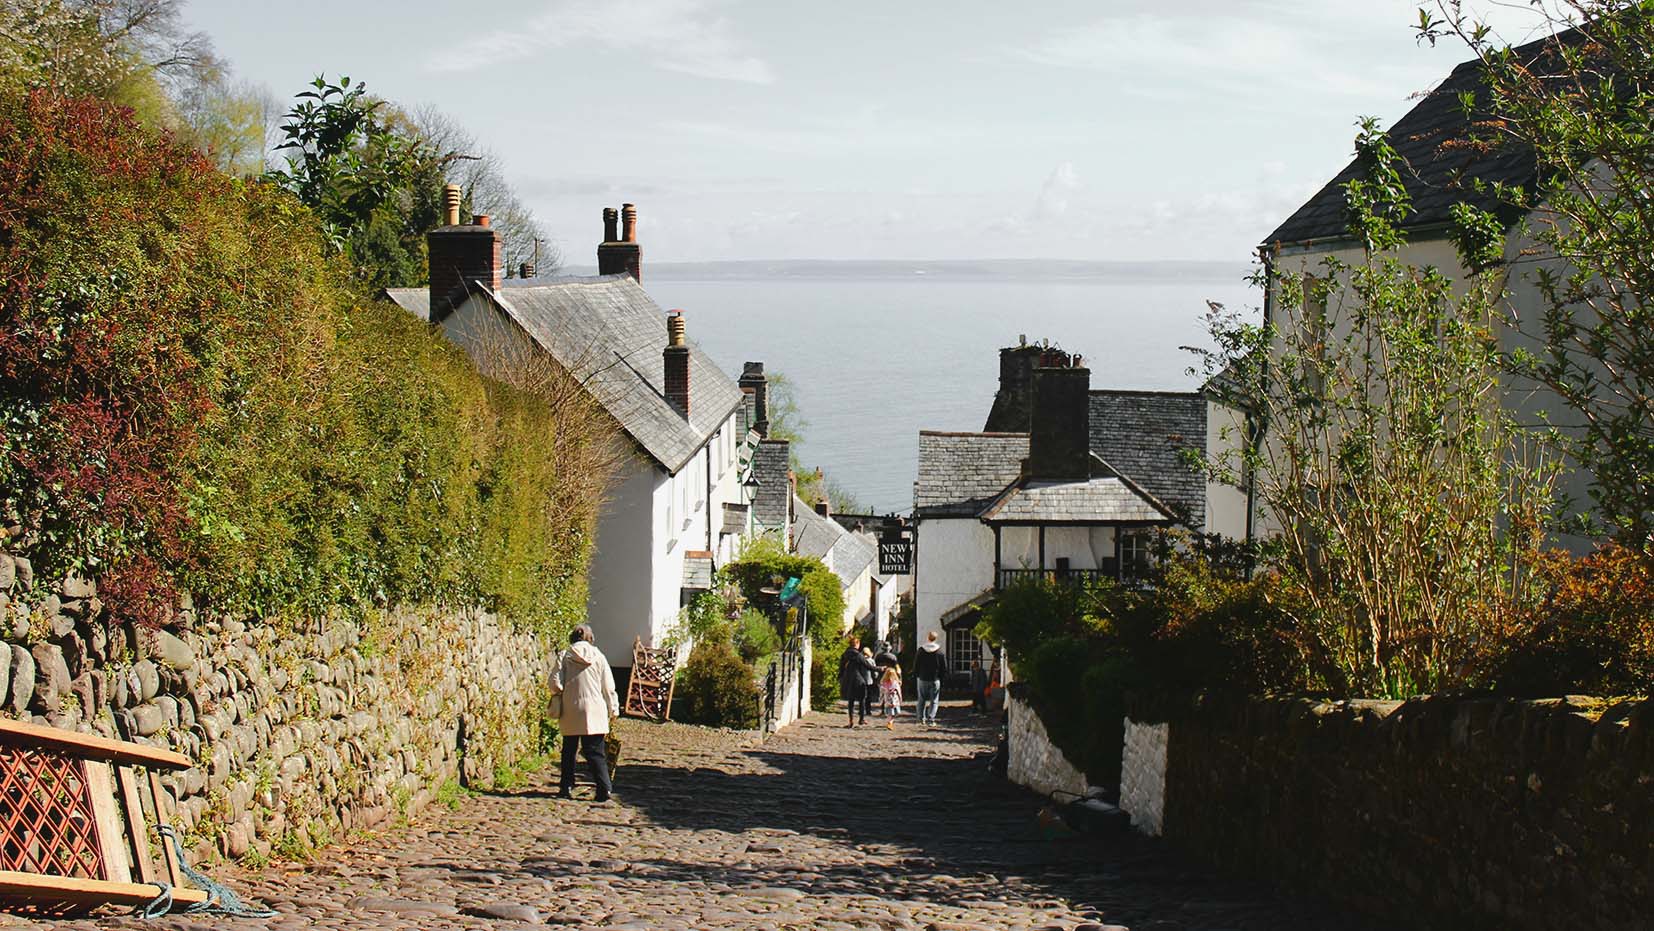 Looking along the streets of the pretty sloping village of Clovelly in North Devon